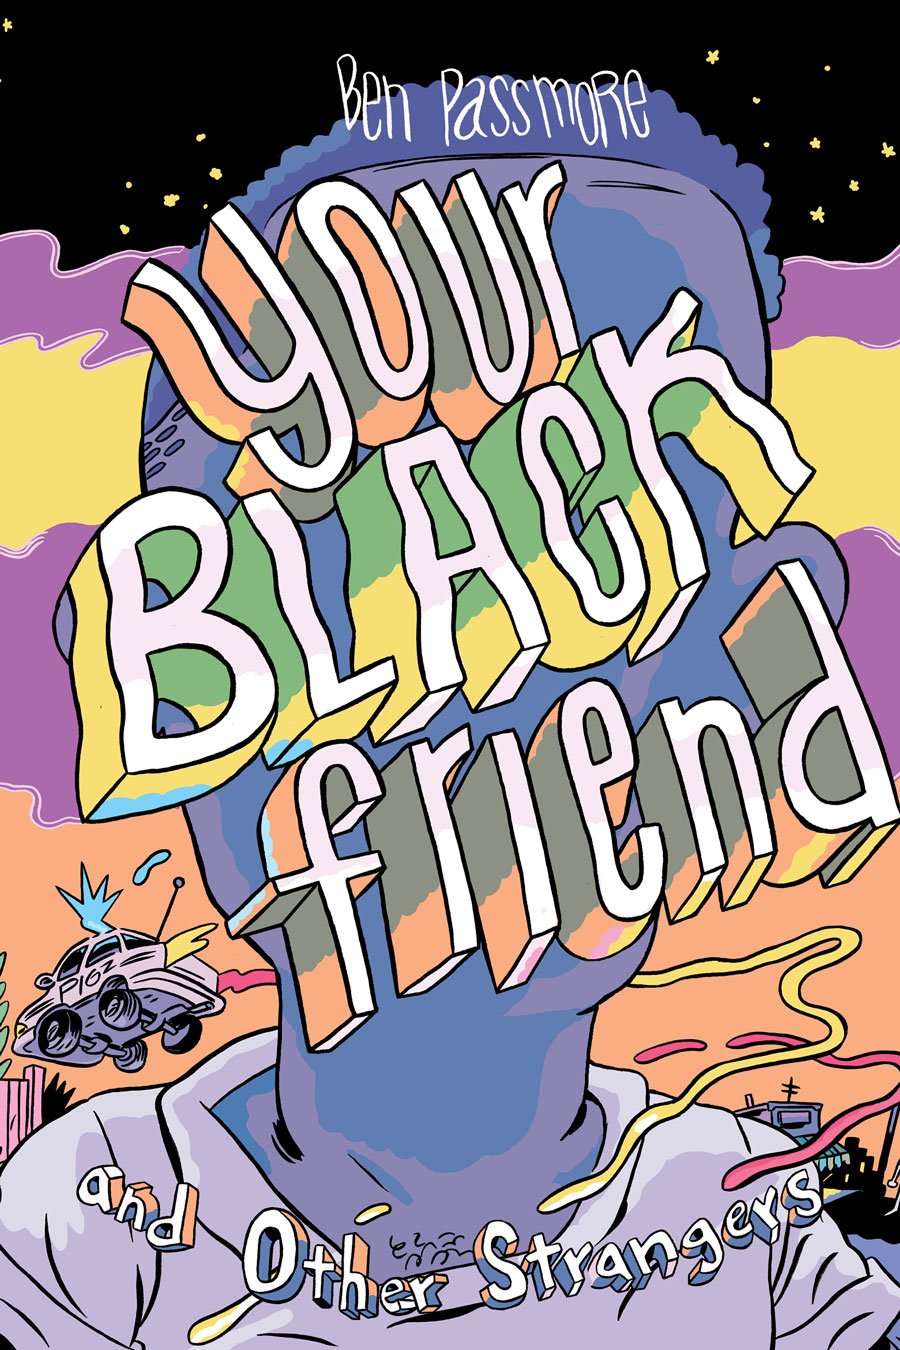 A book cover for Your Black Friend and Other Strangers